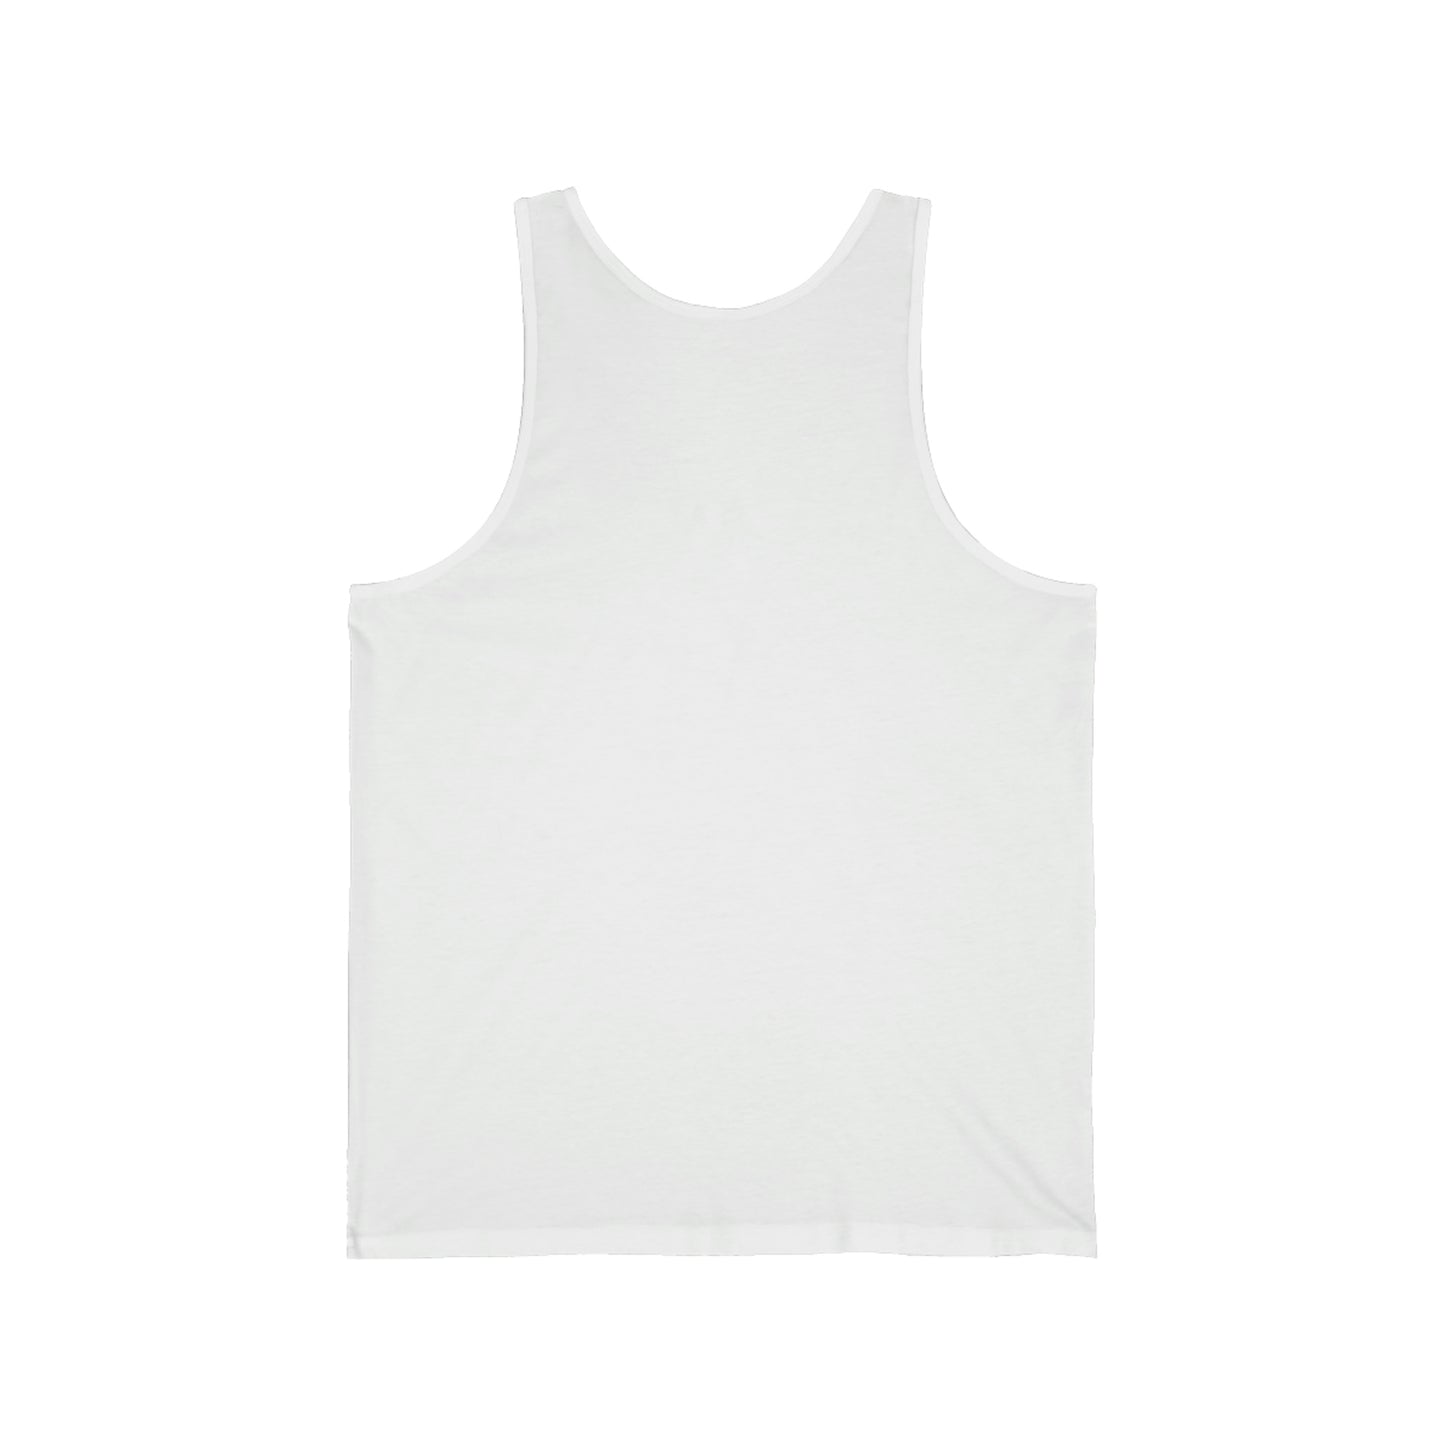 Party in the USA Men's Tank